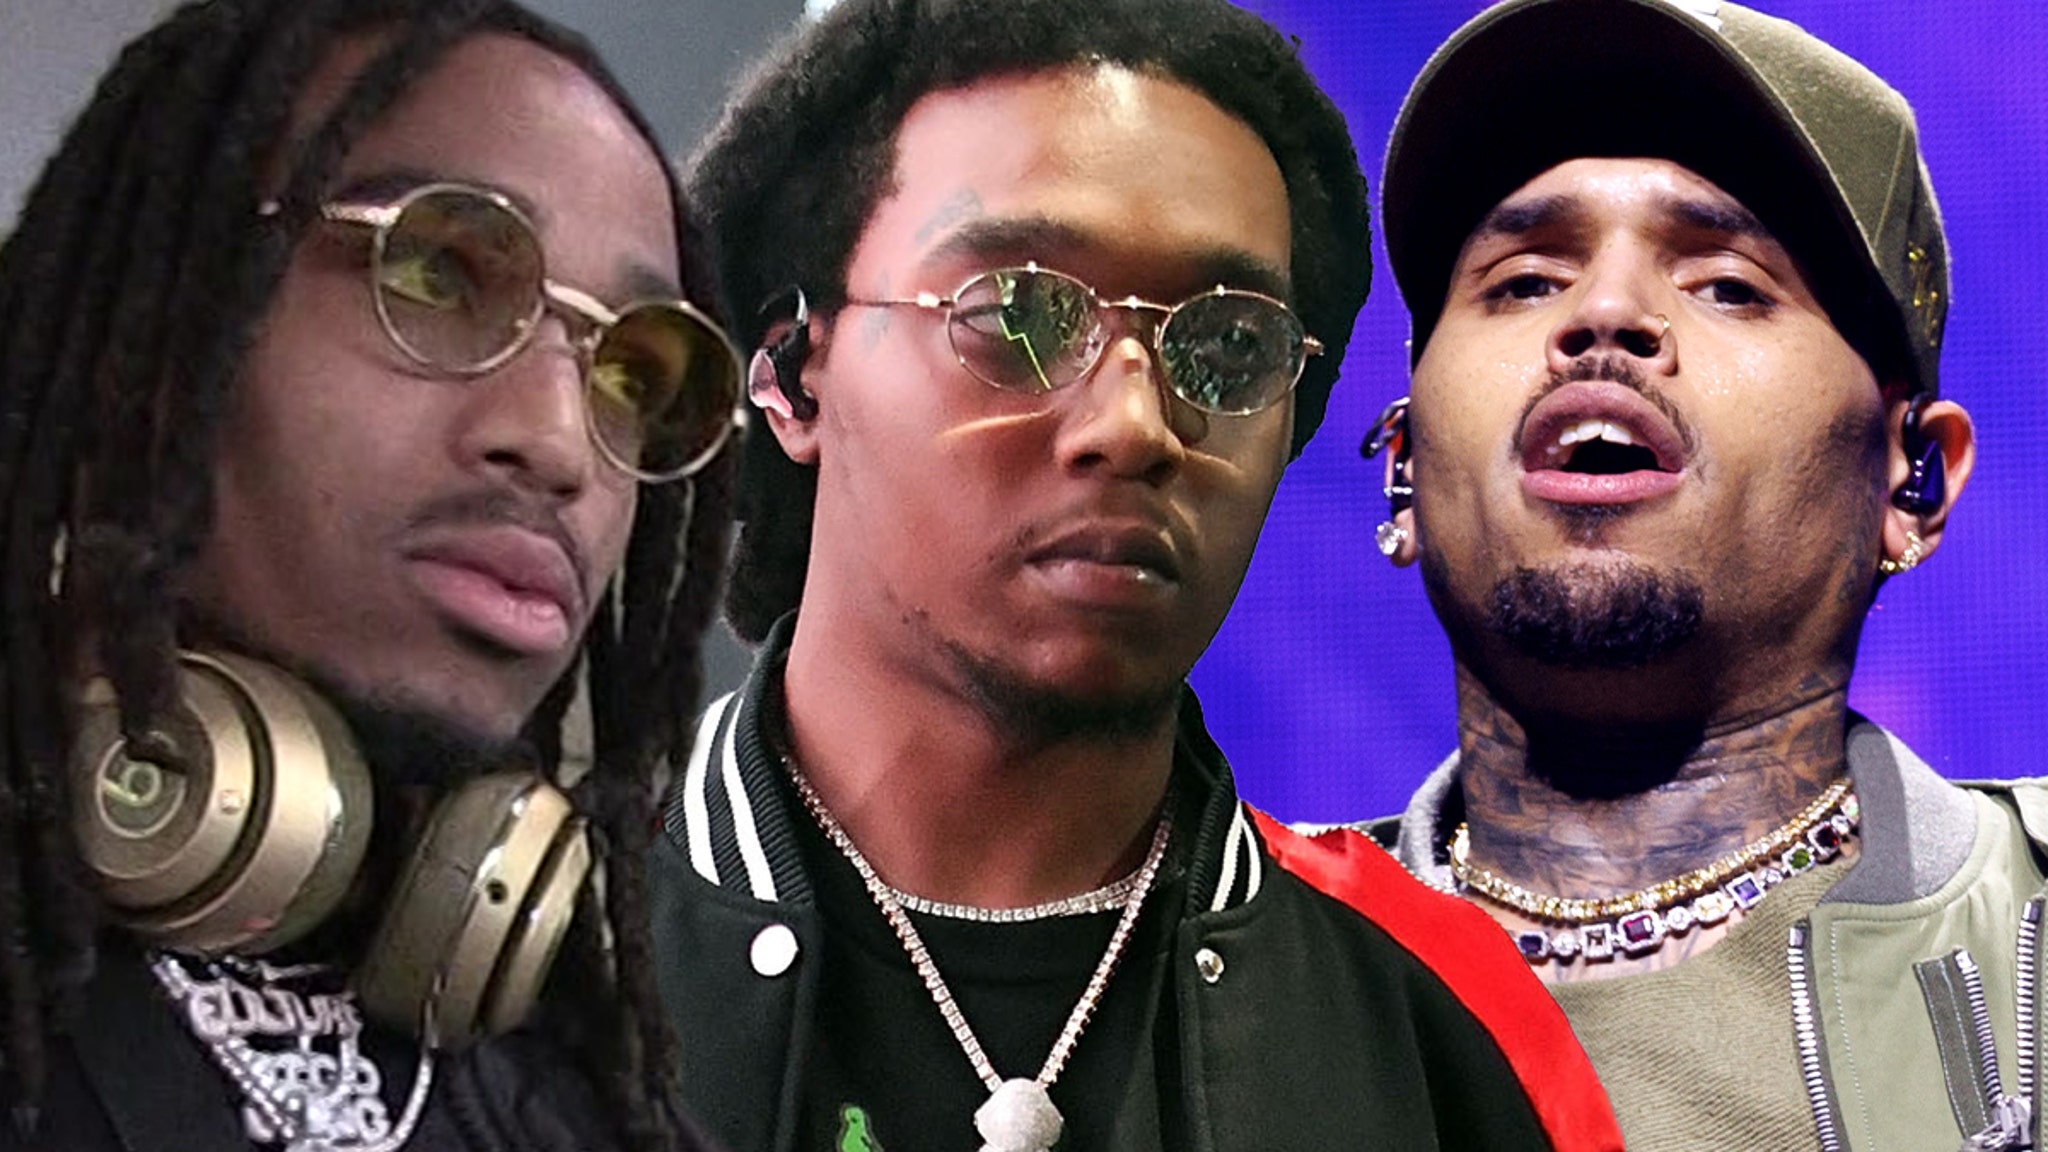 Quavo goes scorched earth in rap rebuttal to Chris Brown, featuring Takeoff